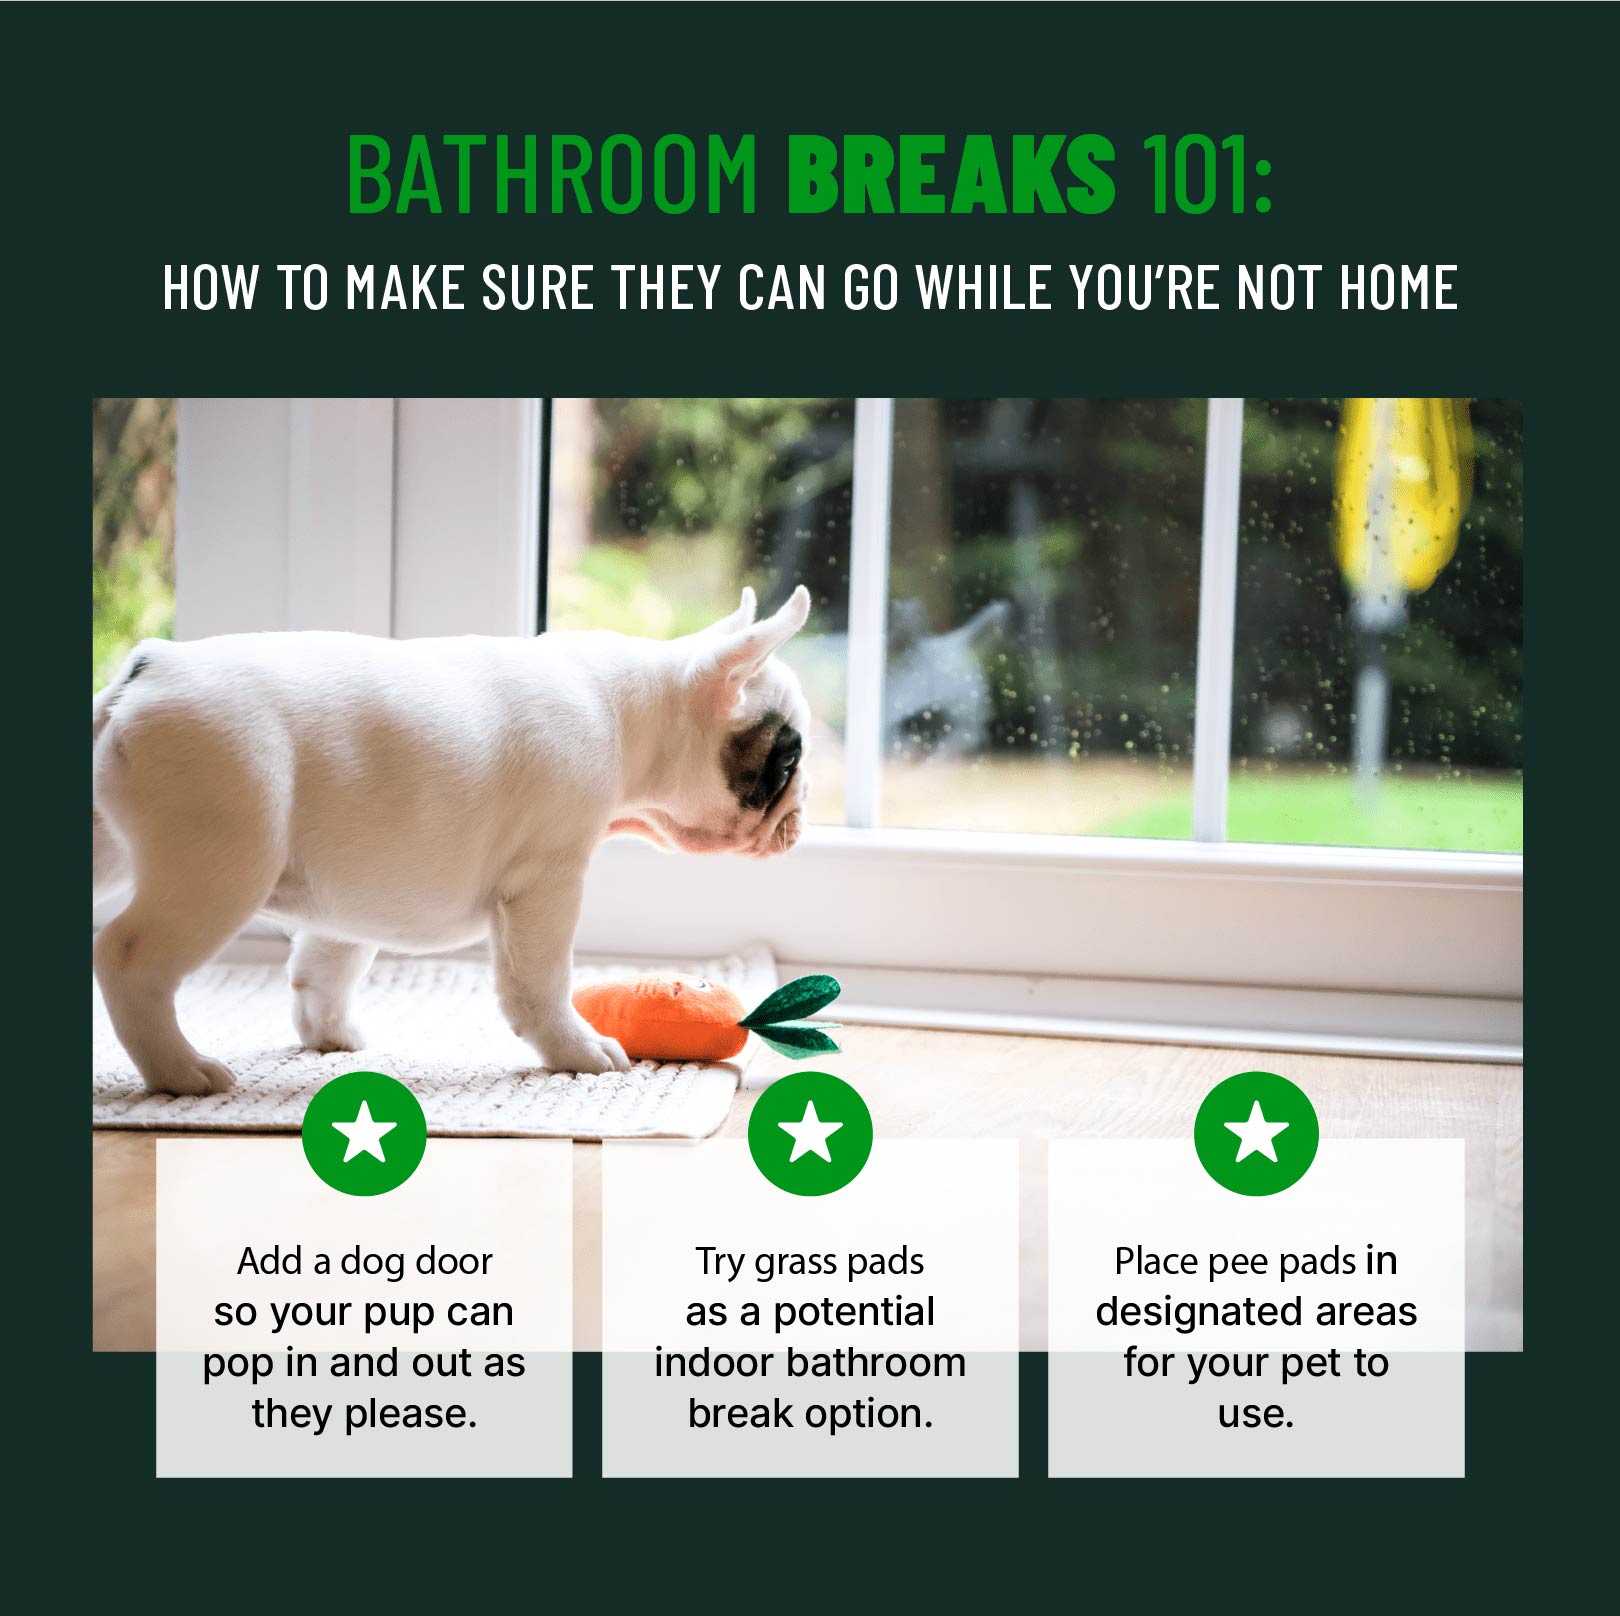 Illustrations and copy covering how your dog can go to the bathroom while you're not home